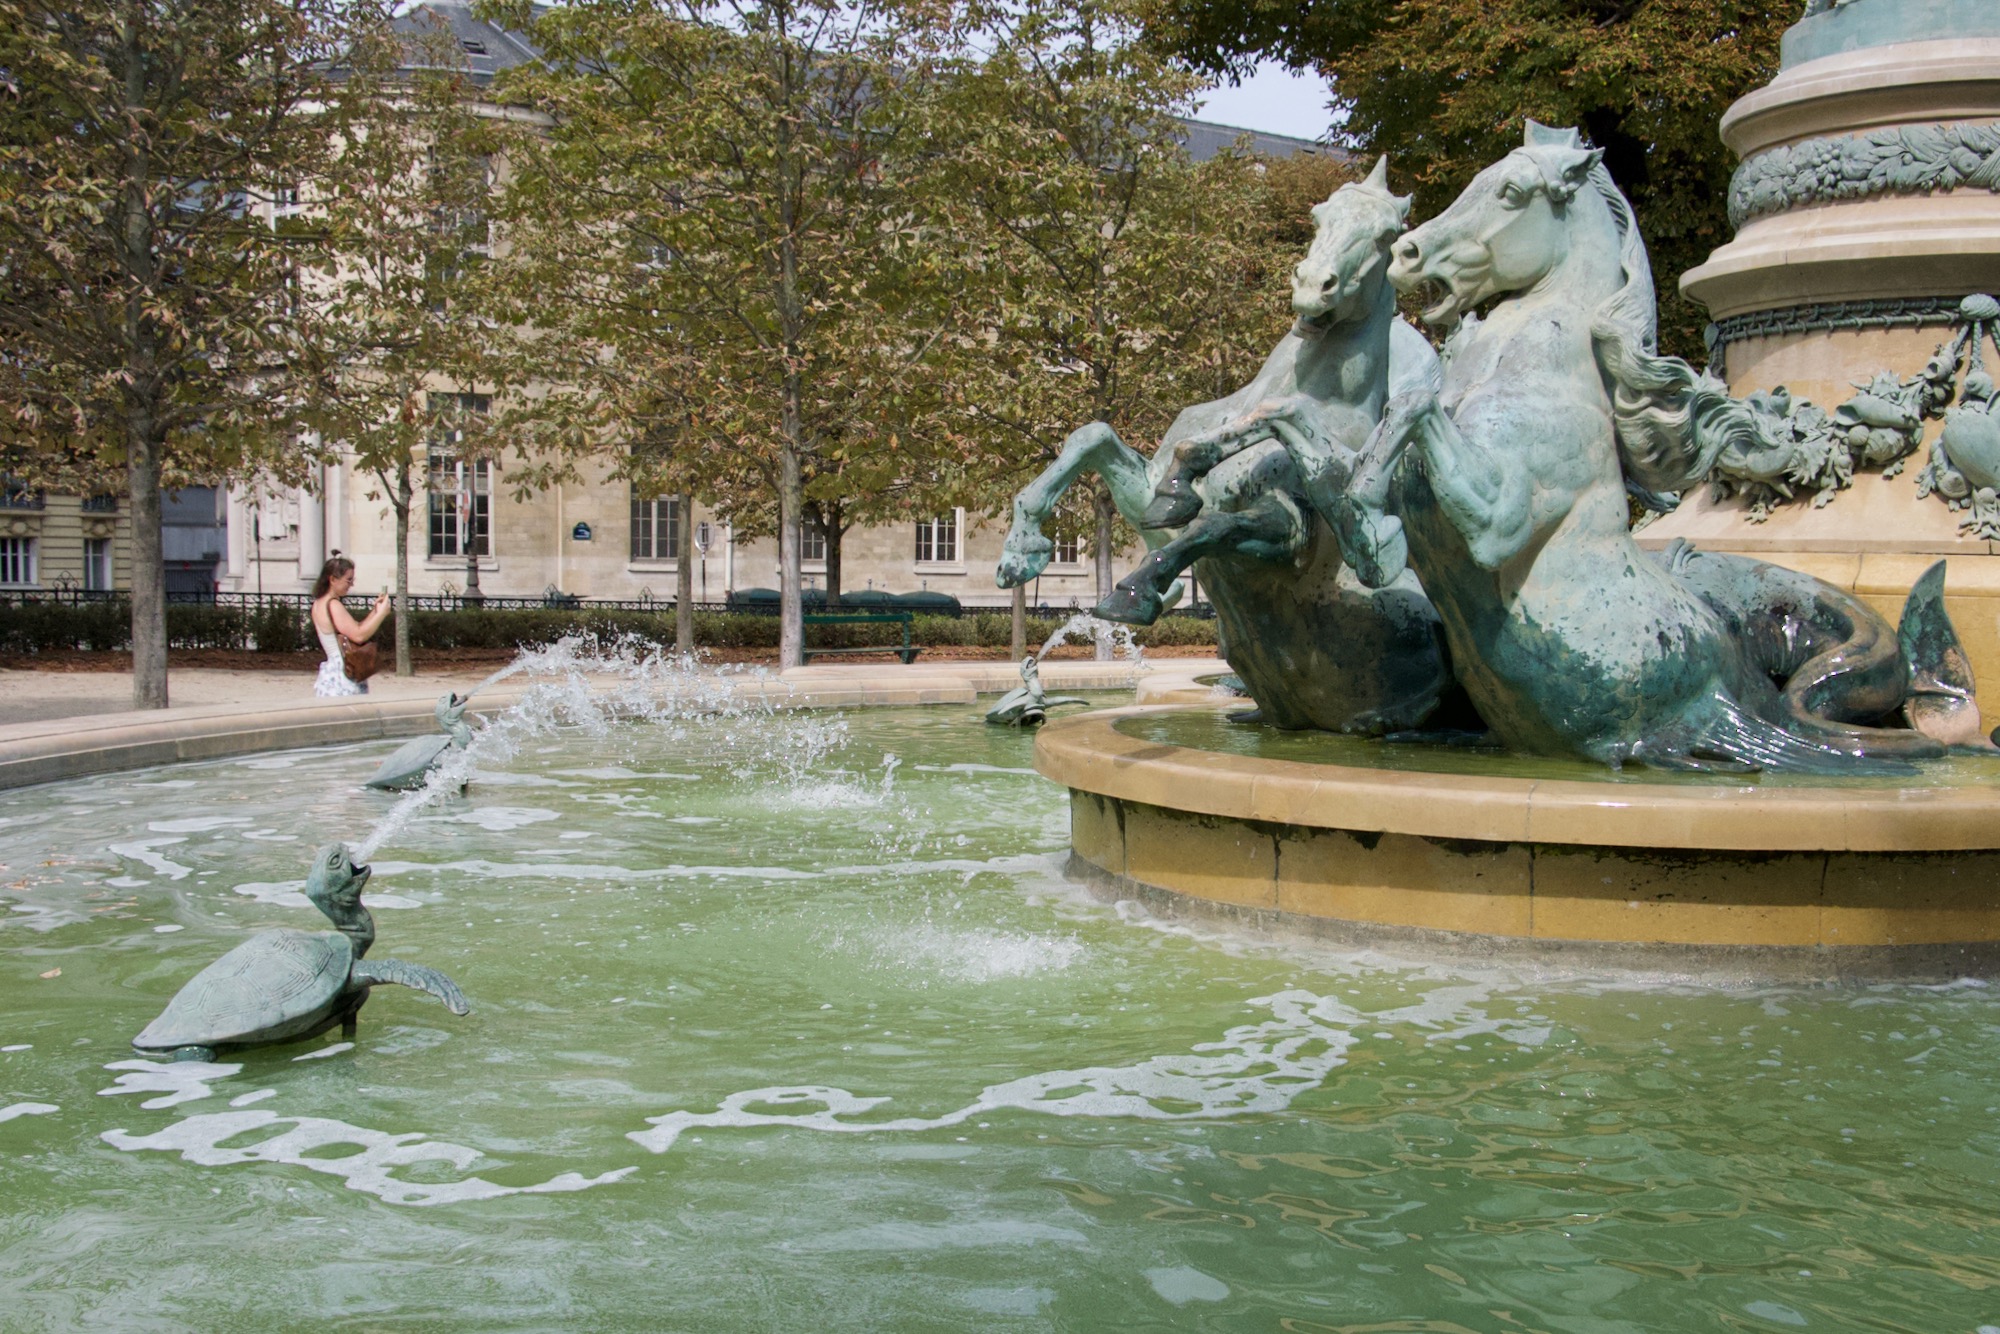 A water feature statue of a tortoise spraying water at horses